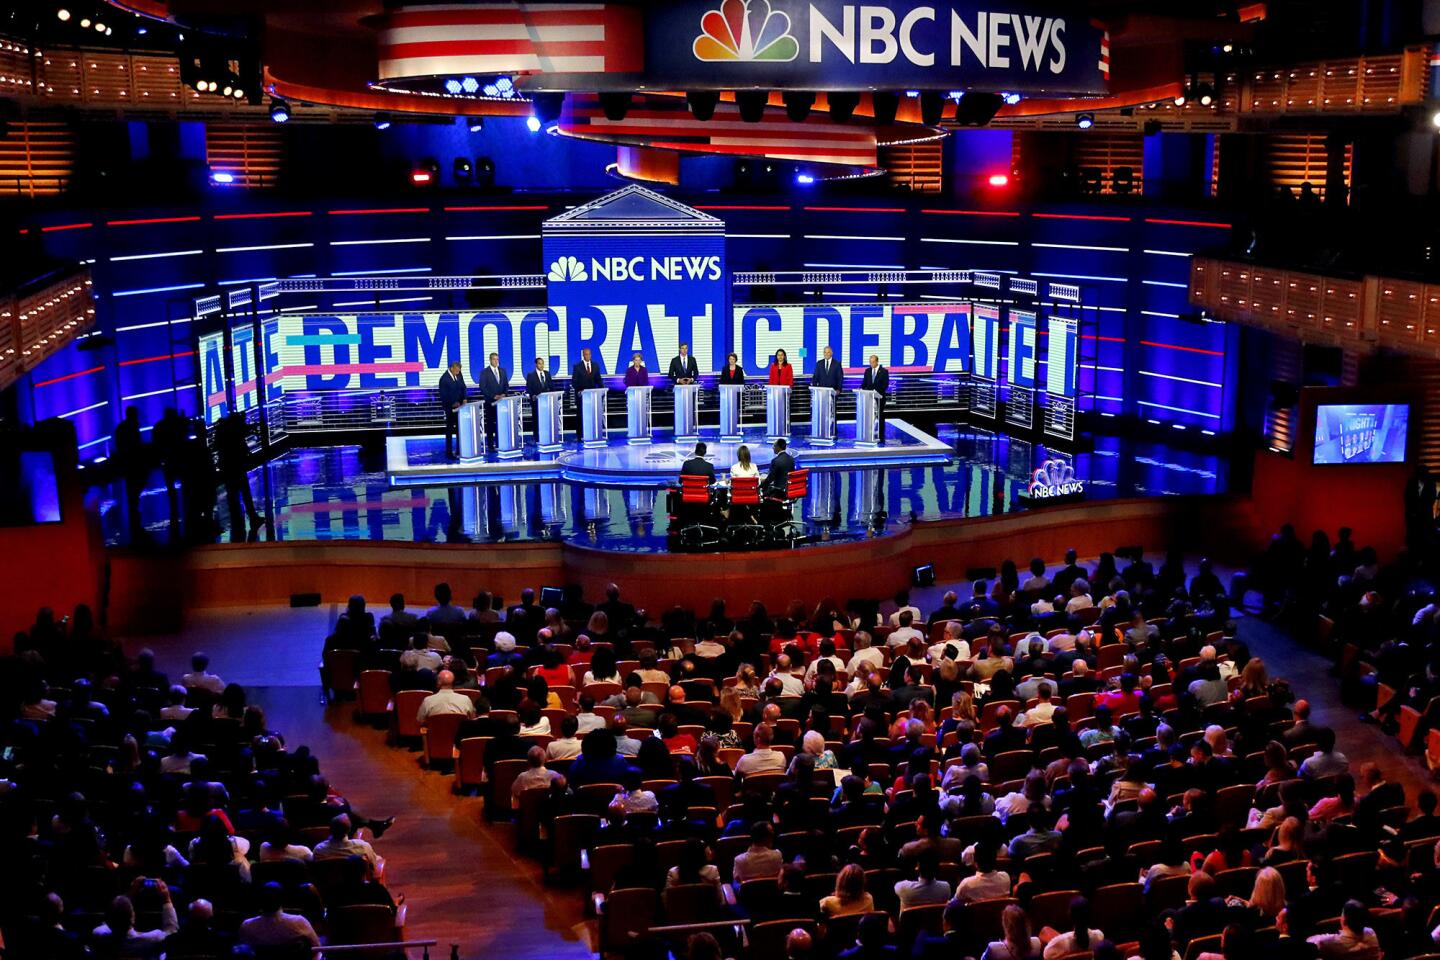 Ten Democratic presidential candidates at the start of the first Democratic primary debate for the 2020 presidential election, hosted by NBC News at the Adrienne Arsht Center for the Performing Arts in Miami on Wednesday.